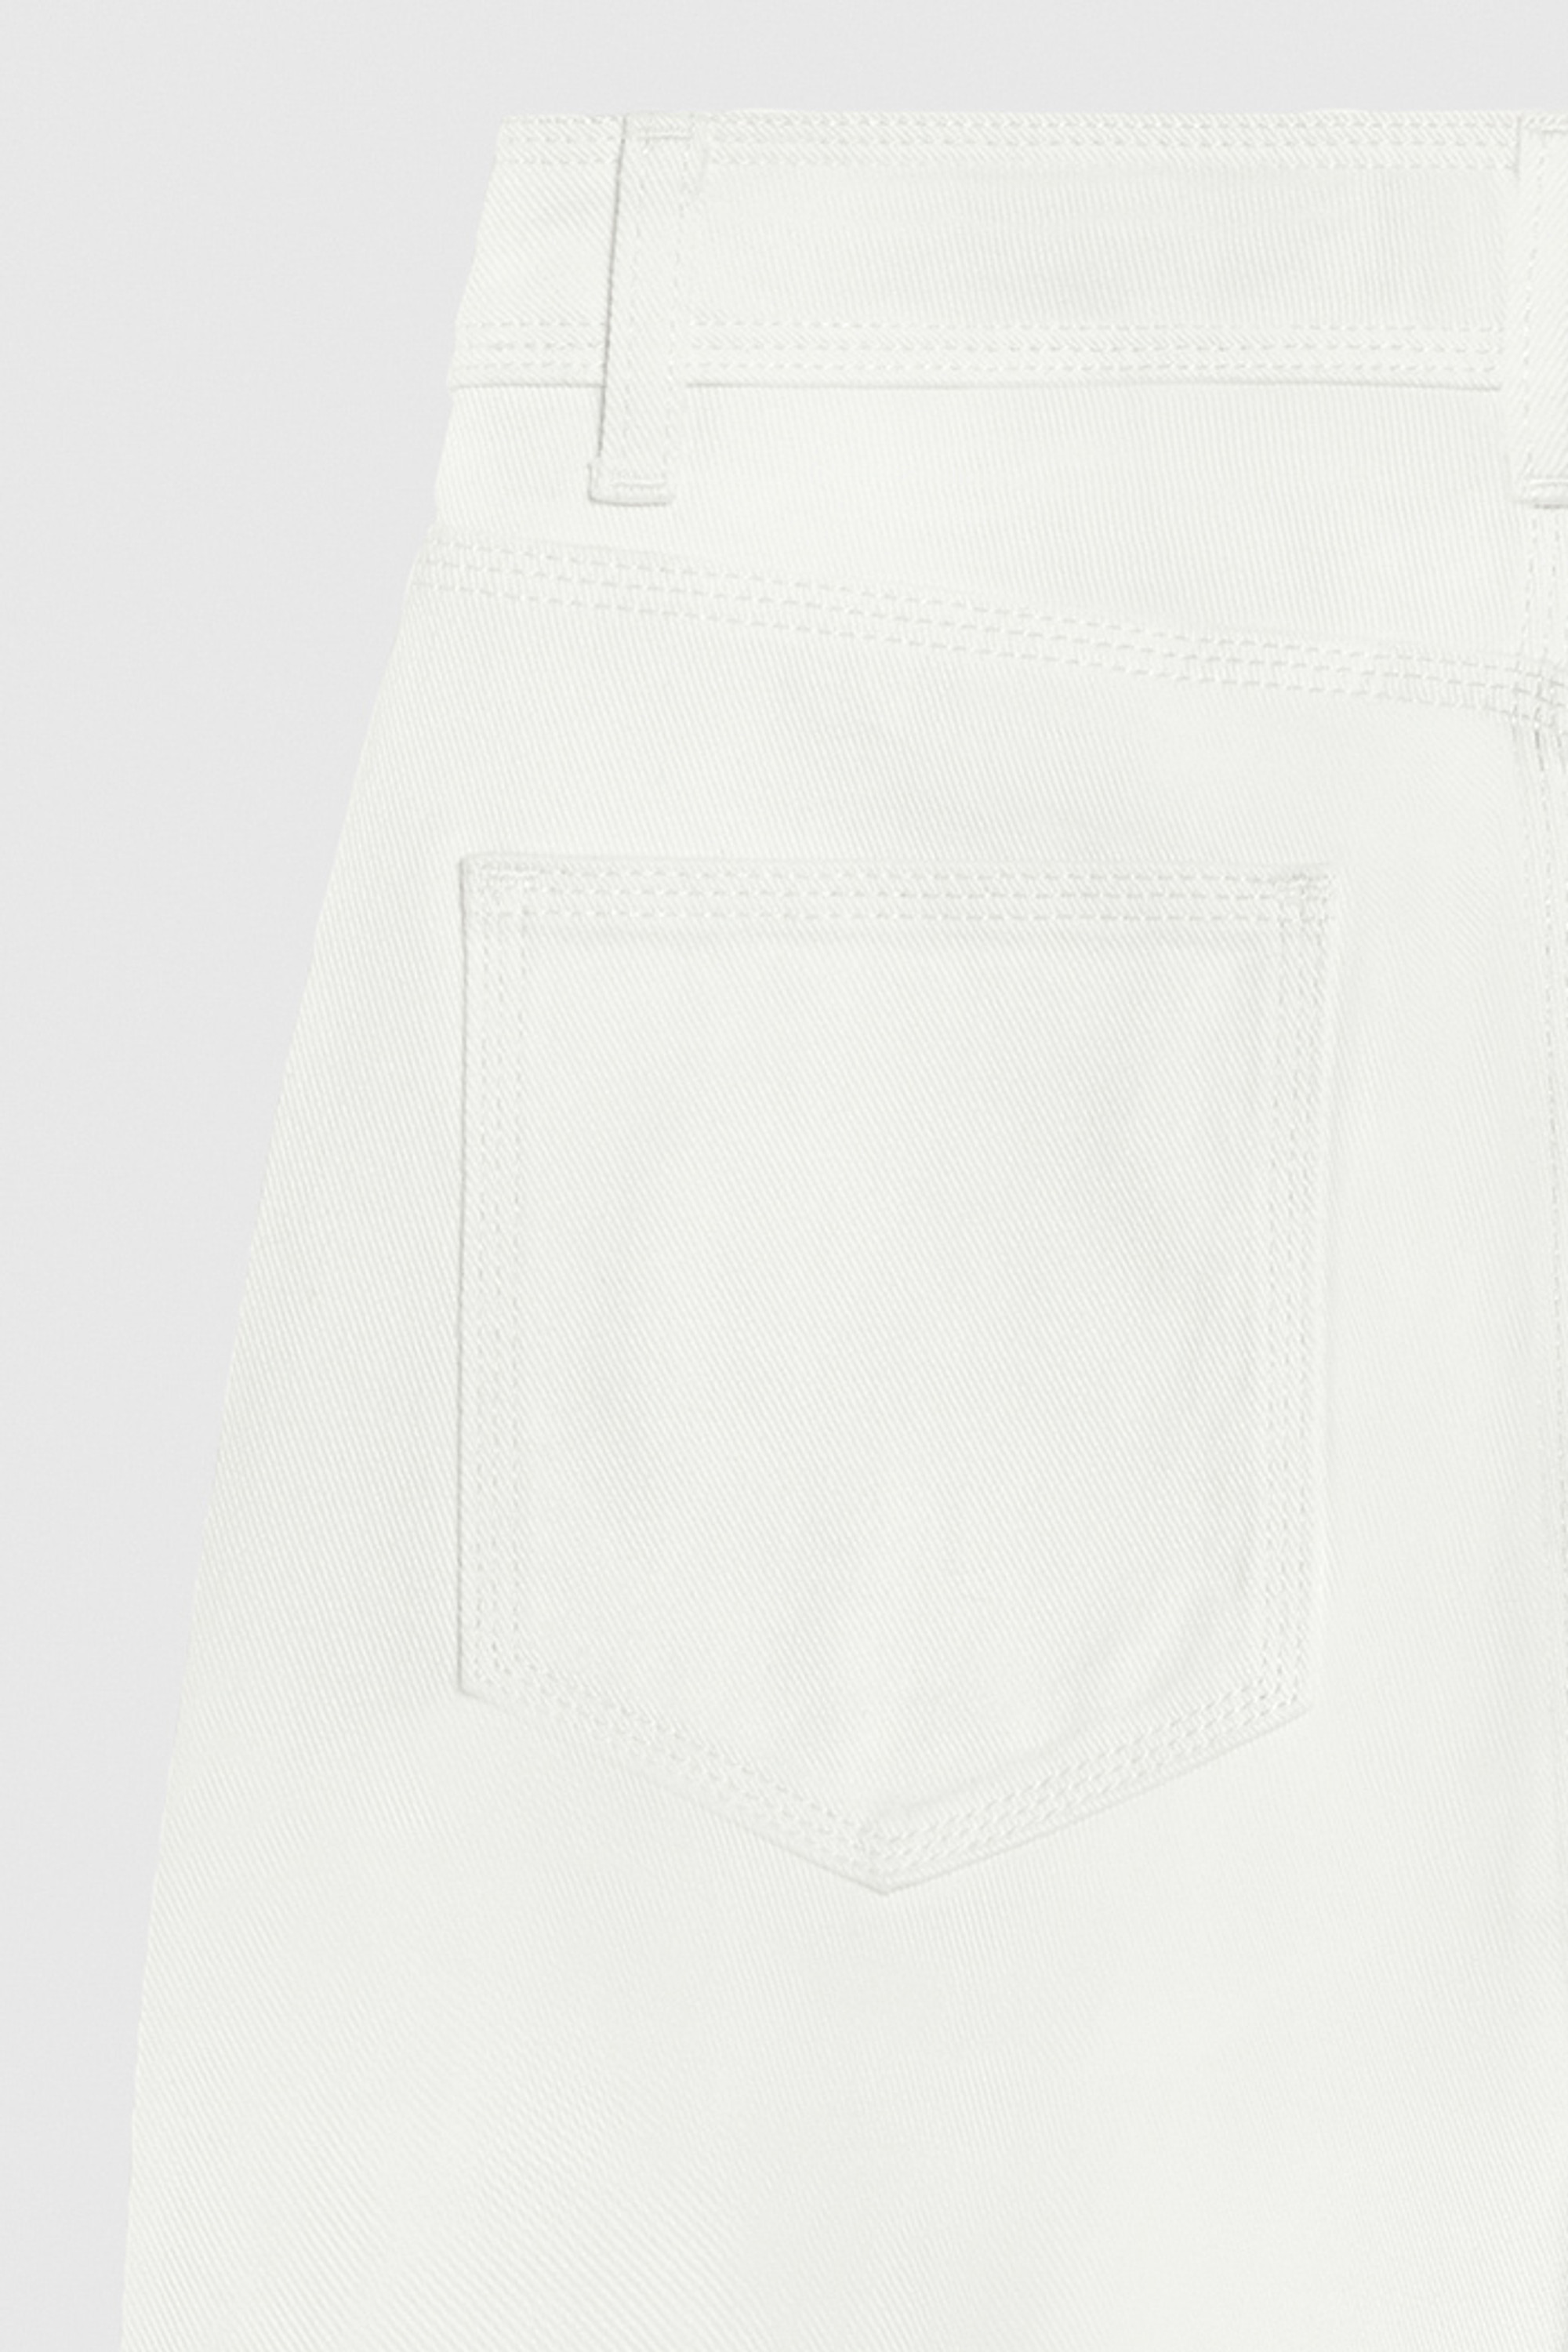 Denim Culottes Ivory - Welcome to the Fold LTD